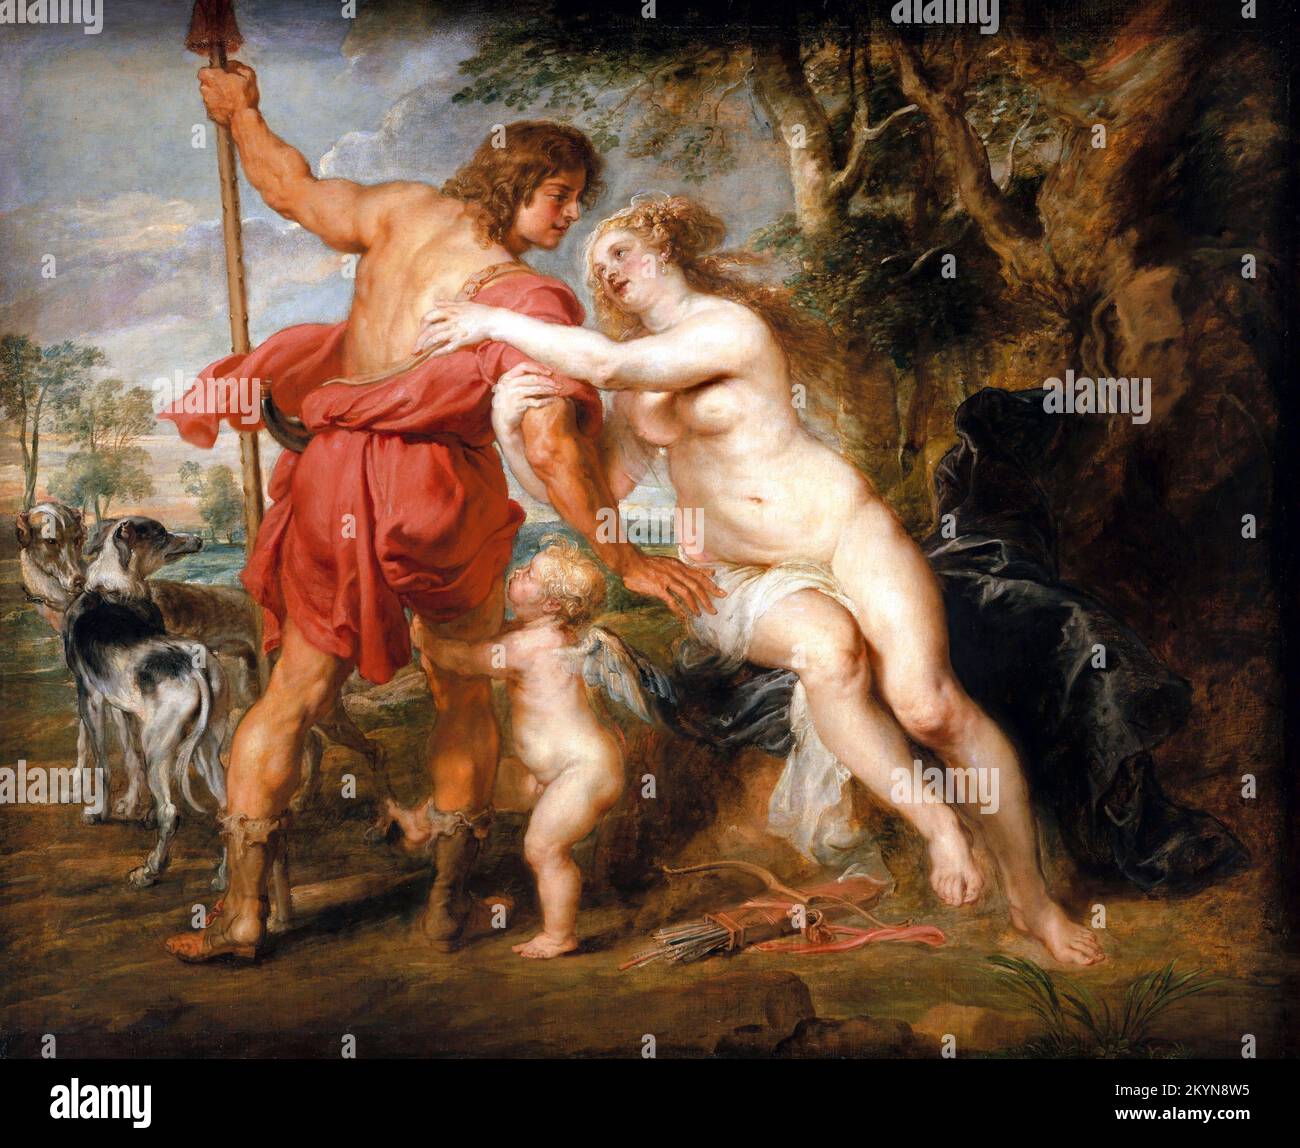 Venus and Adonis by Peter Paul Rubens (1577-1640), oil on canvas, mid 1630s Stock Photo